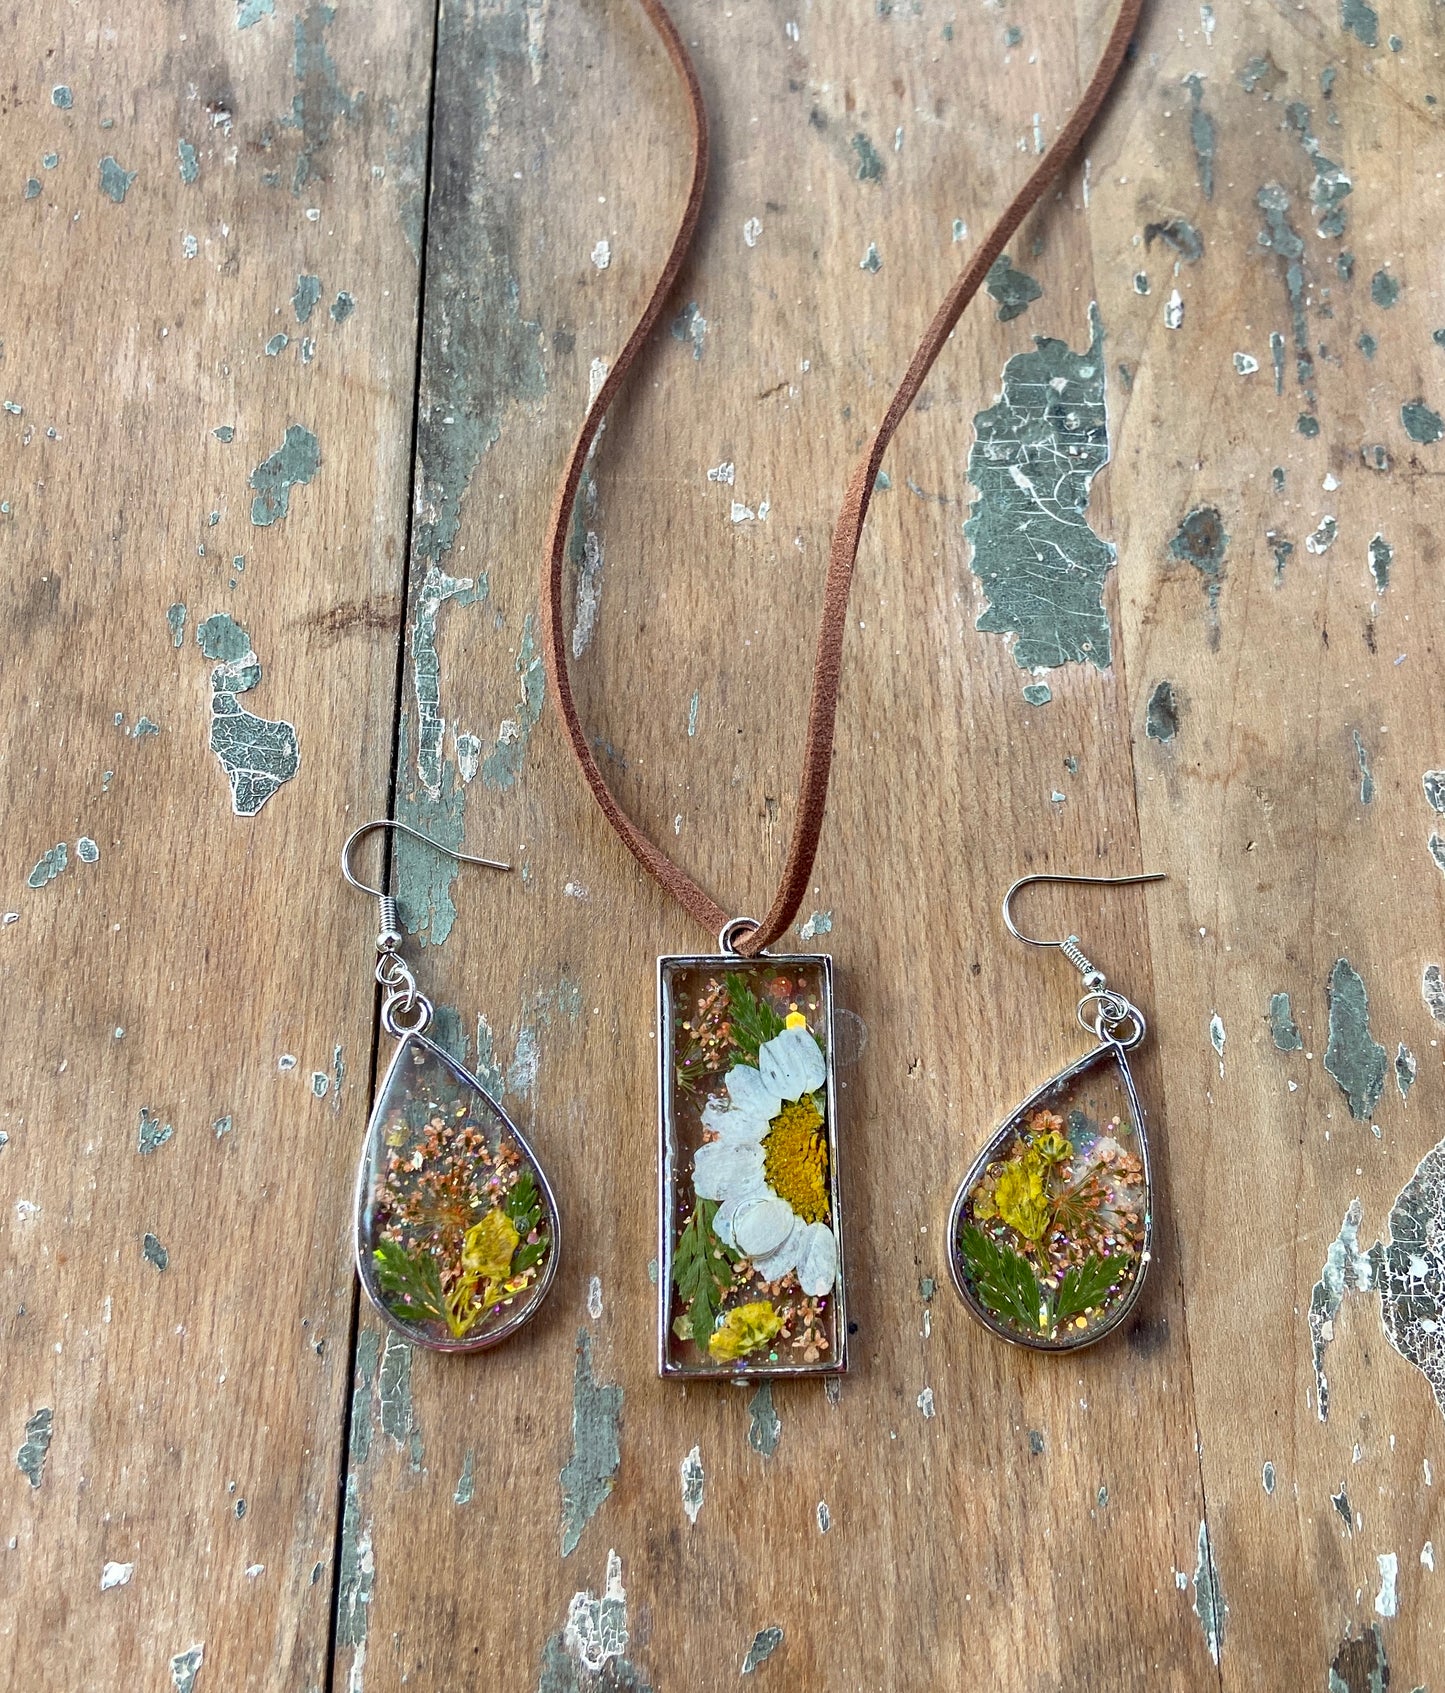 Resin Jewelry Workshop: Halloween themed or Dried Flowers . Saturday October 21 . Tap that Tap Room